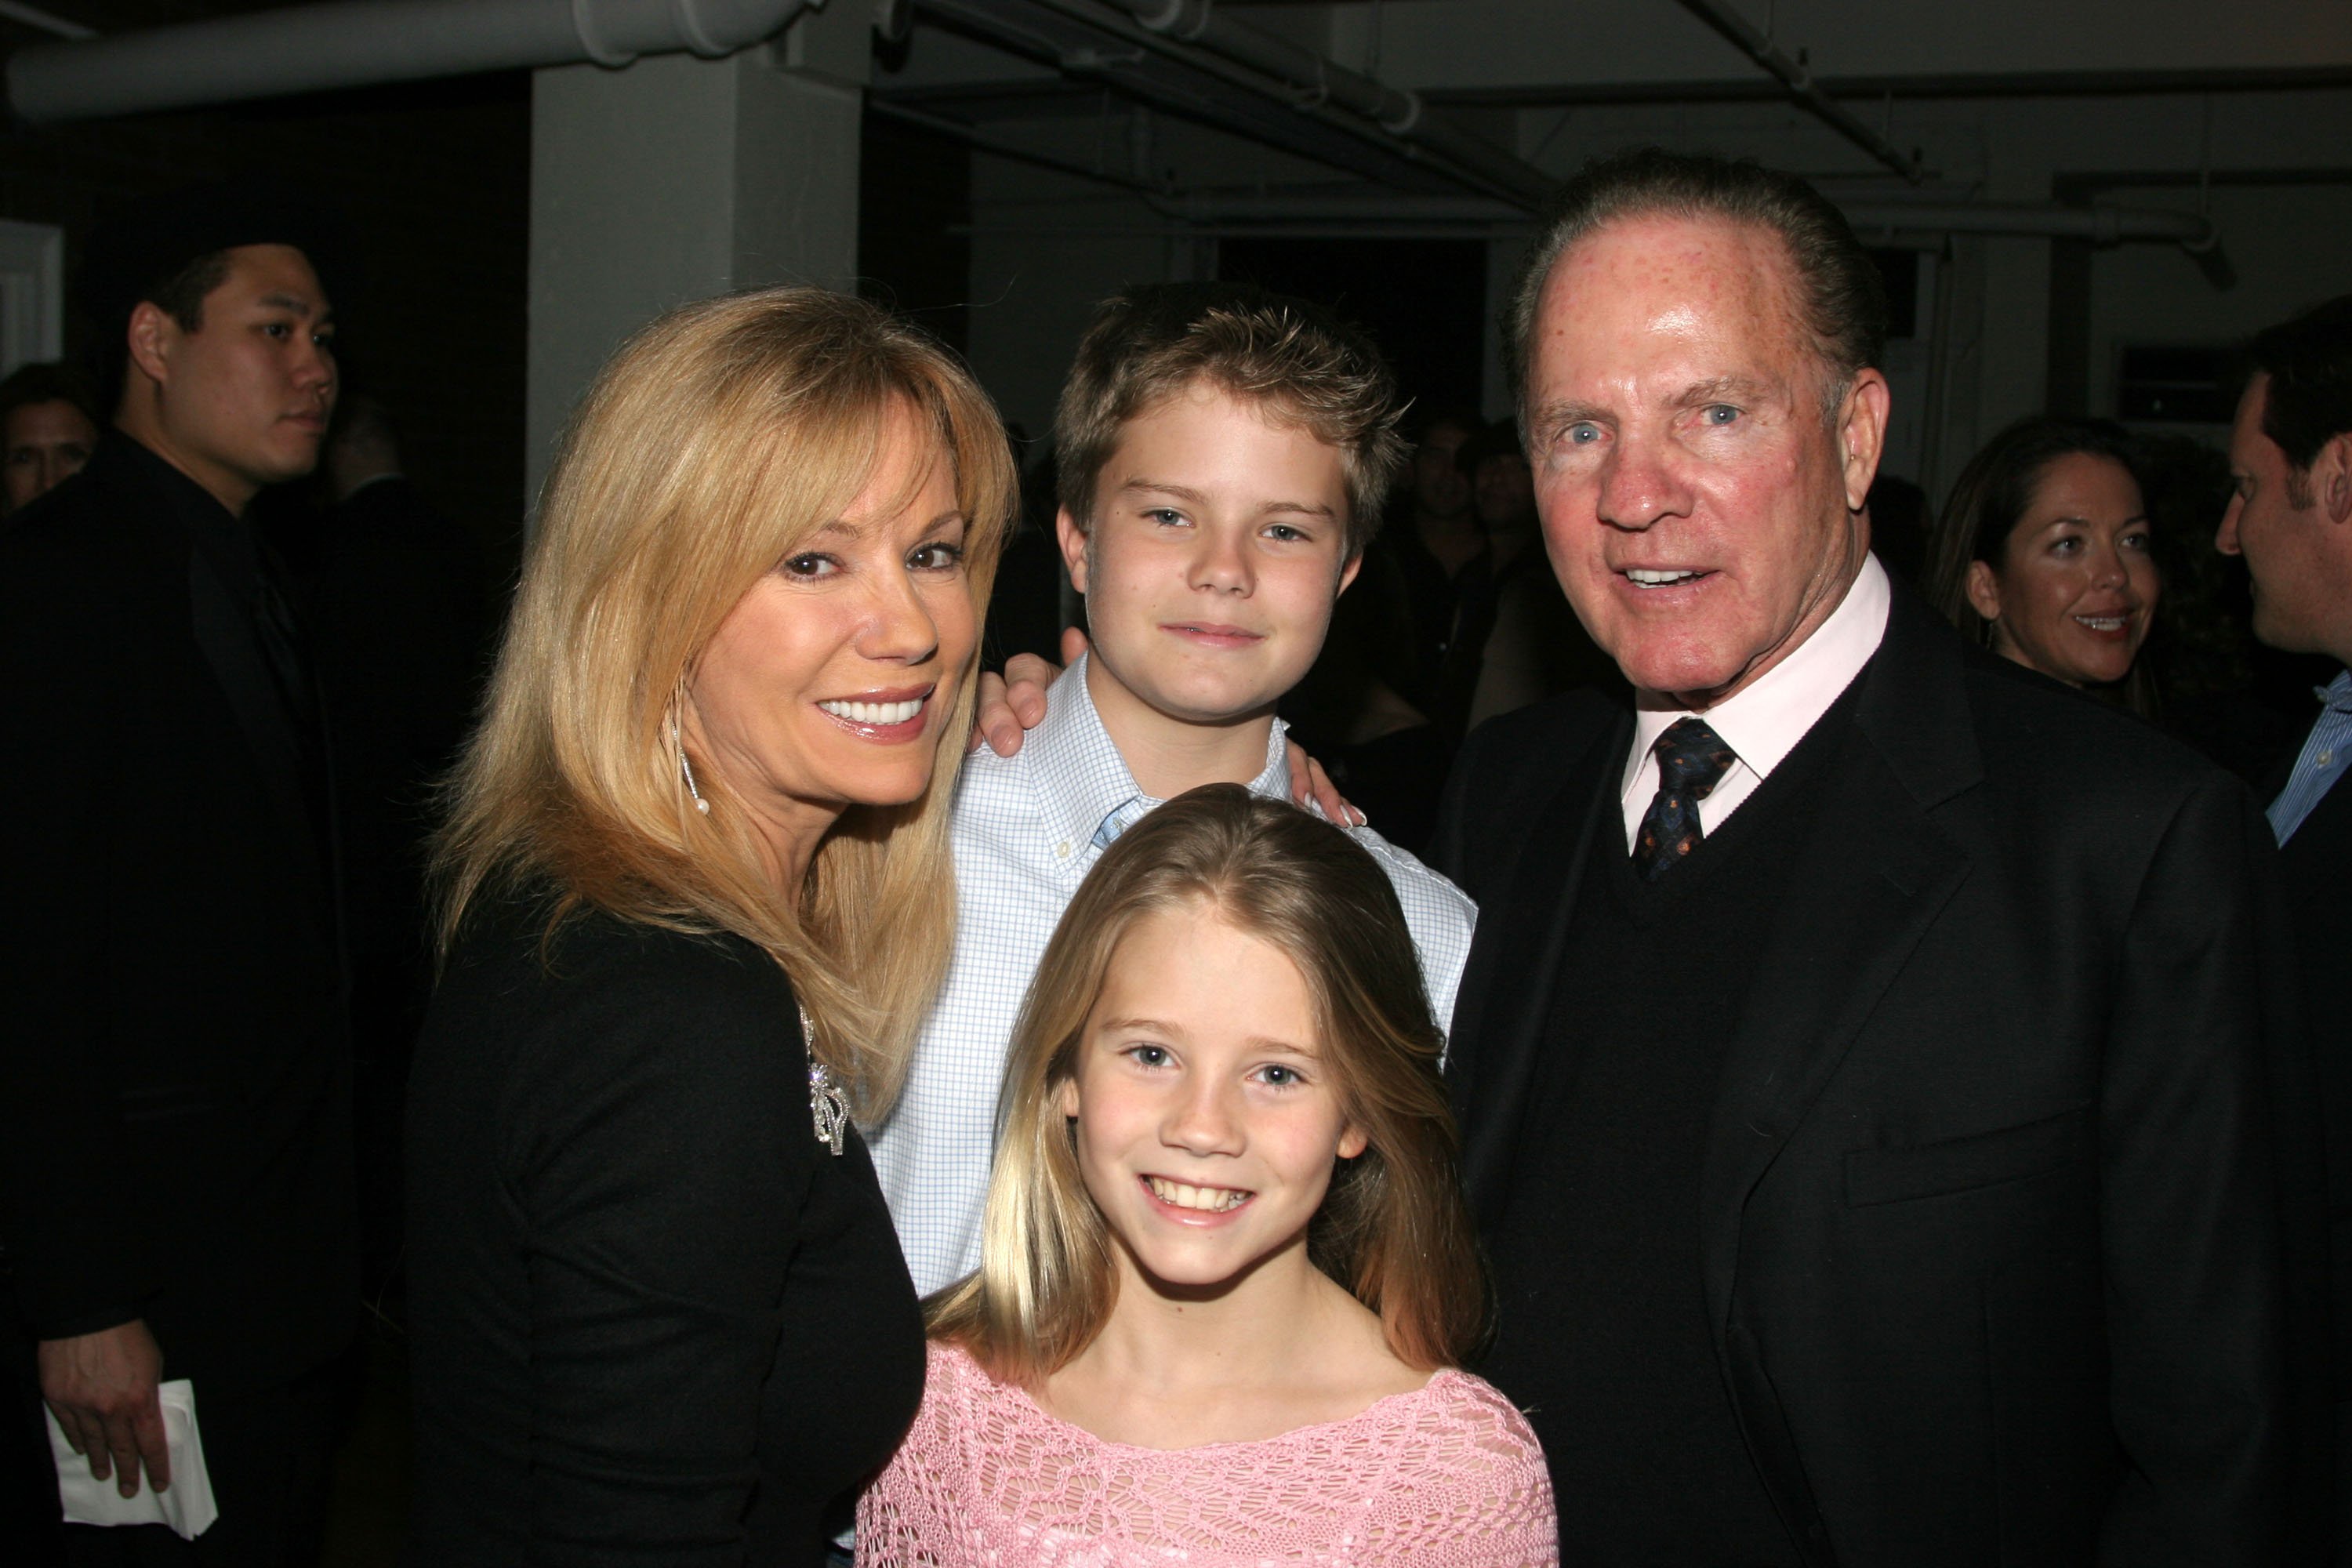 Kathie Lee Gifford, Cody and Cassidy and Frank Gifford. | Source: Getty Images